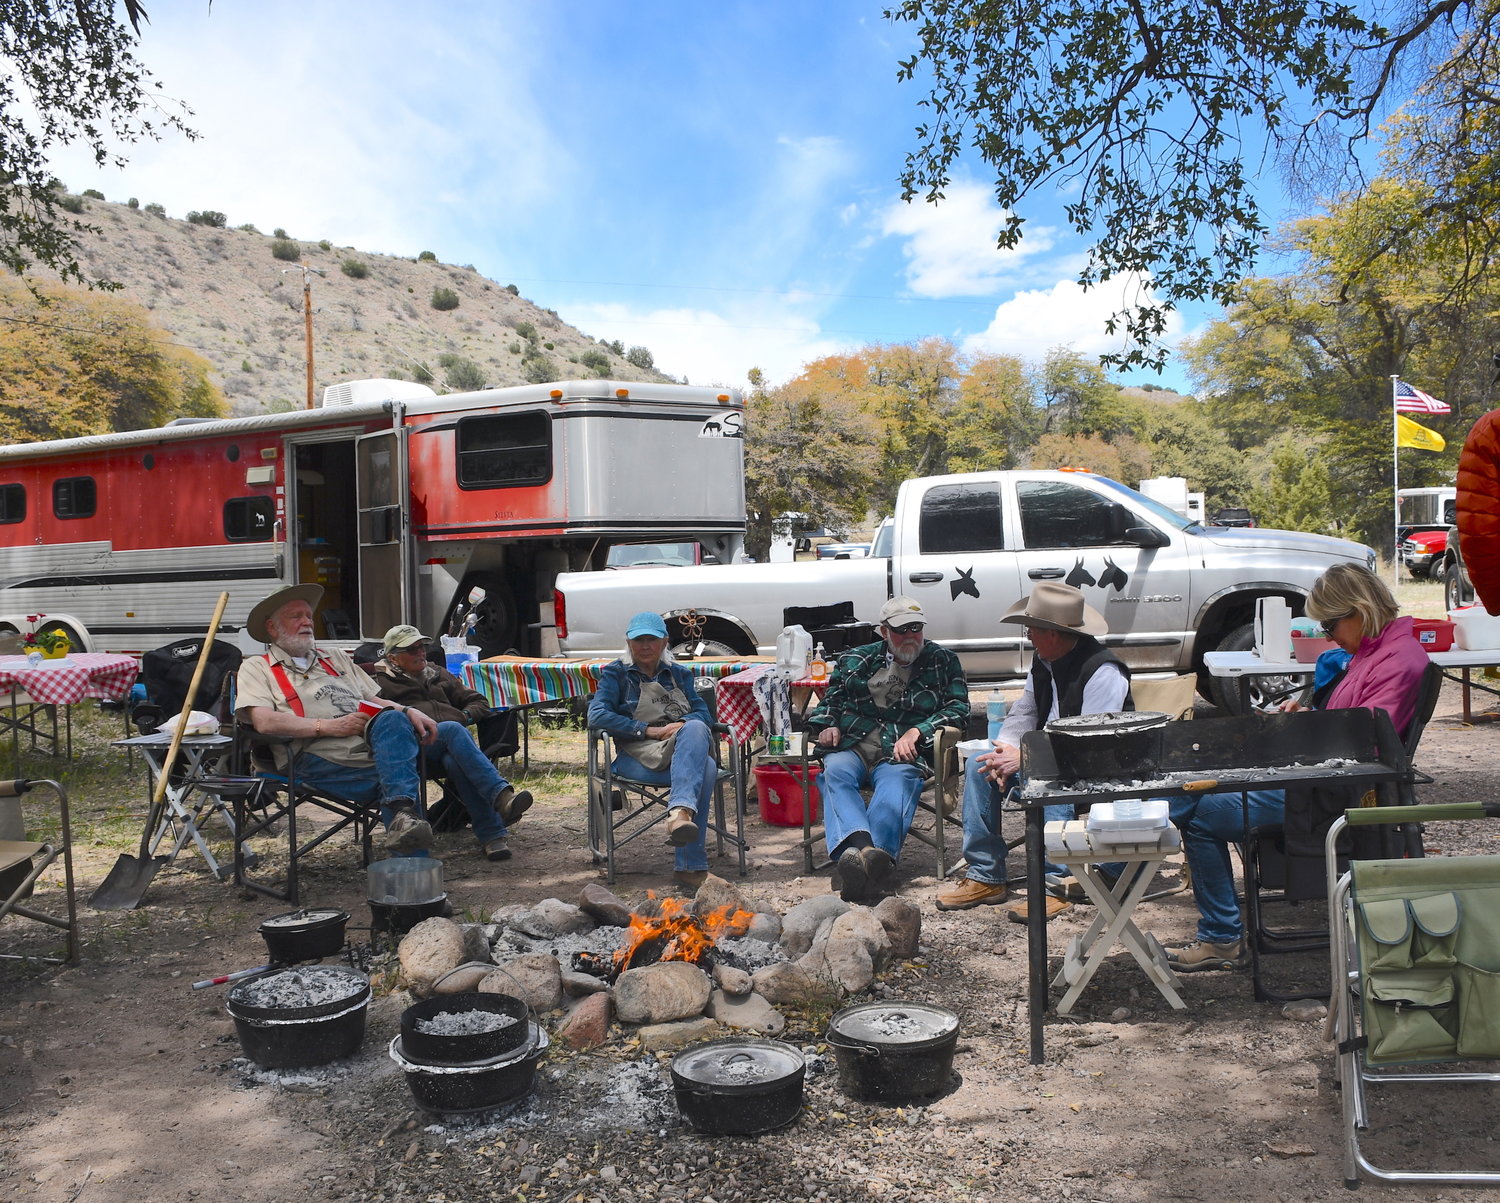 There’s something special about getting together outdoors for a Dutch Oven meal like those on tap at the Dutch Oven Gathering in Glenwood April 10.